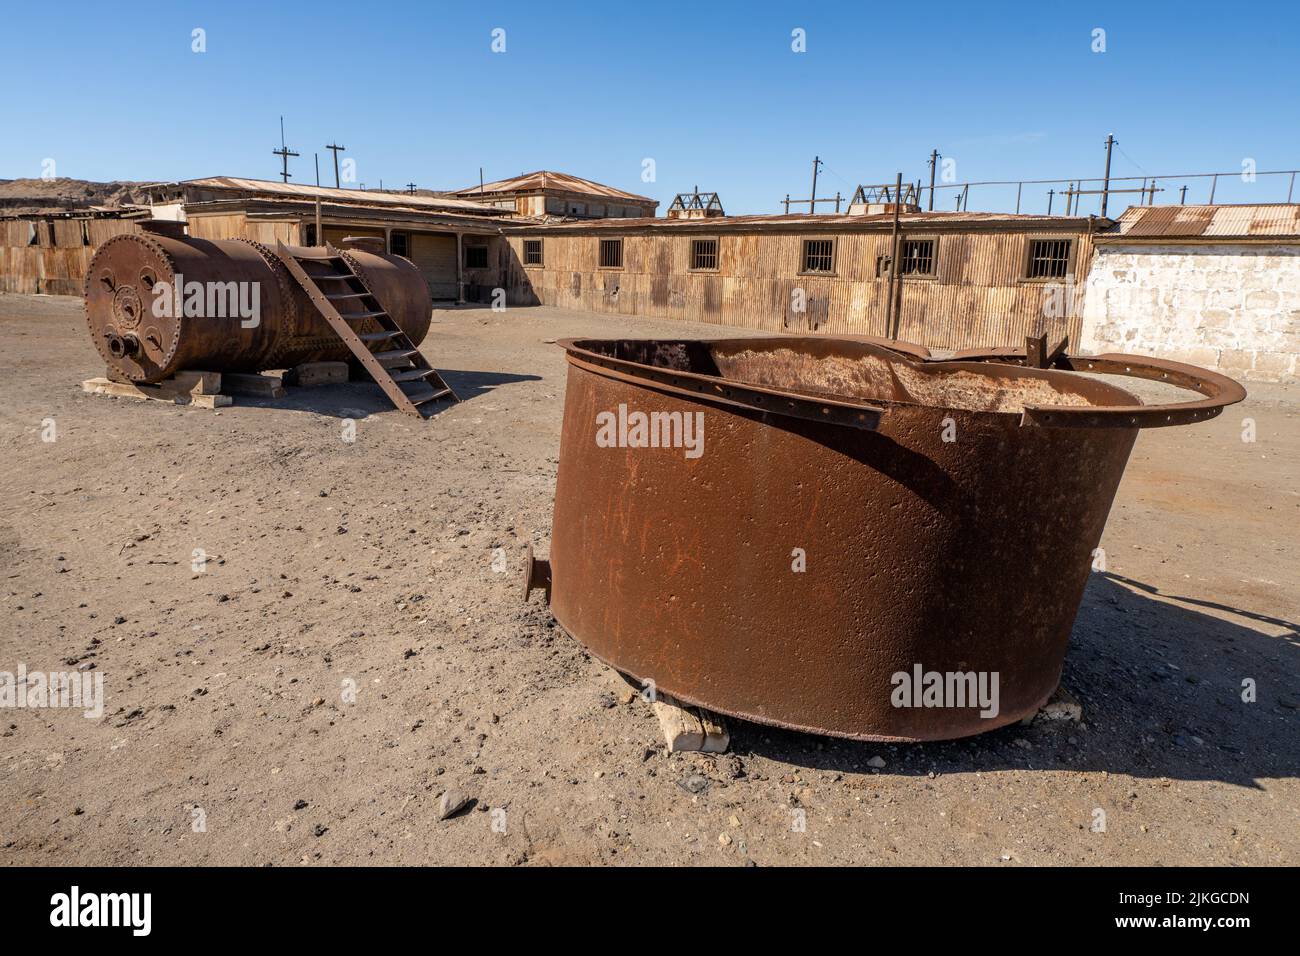 Old rusted vats and a steam boiler in the outdoor museum of the saltpeter works at Humberstone, Chile. Stock Photo